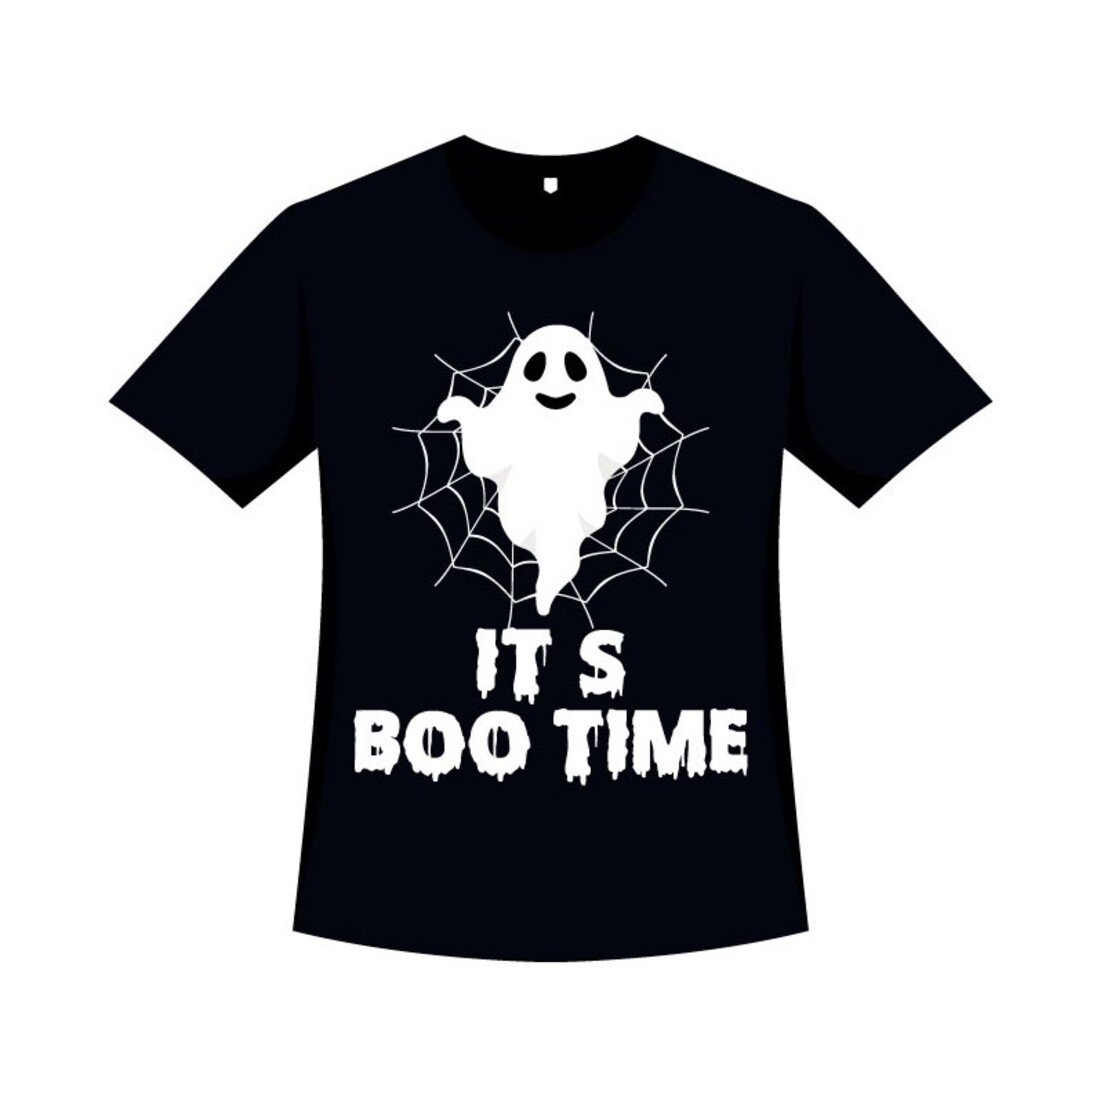 Halloween Simple Black Color T-shirt cover image.